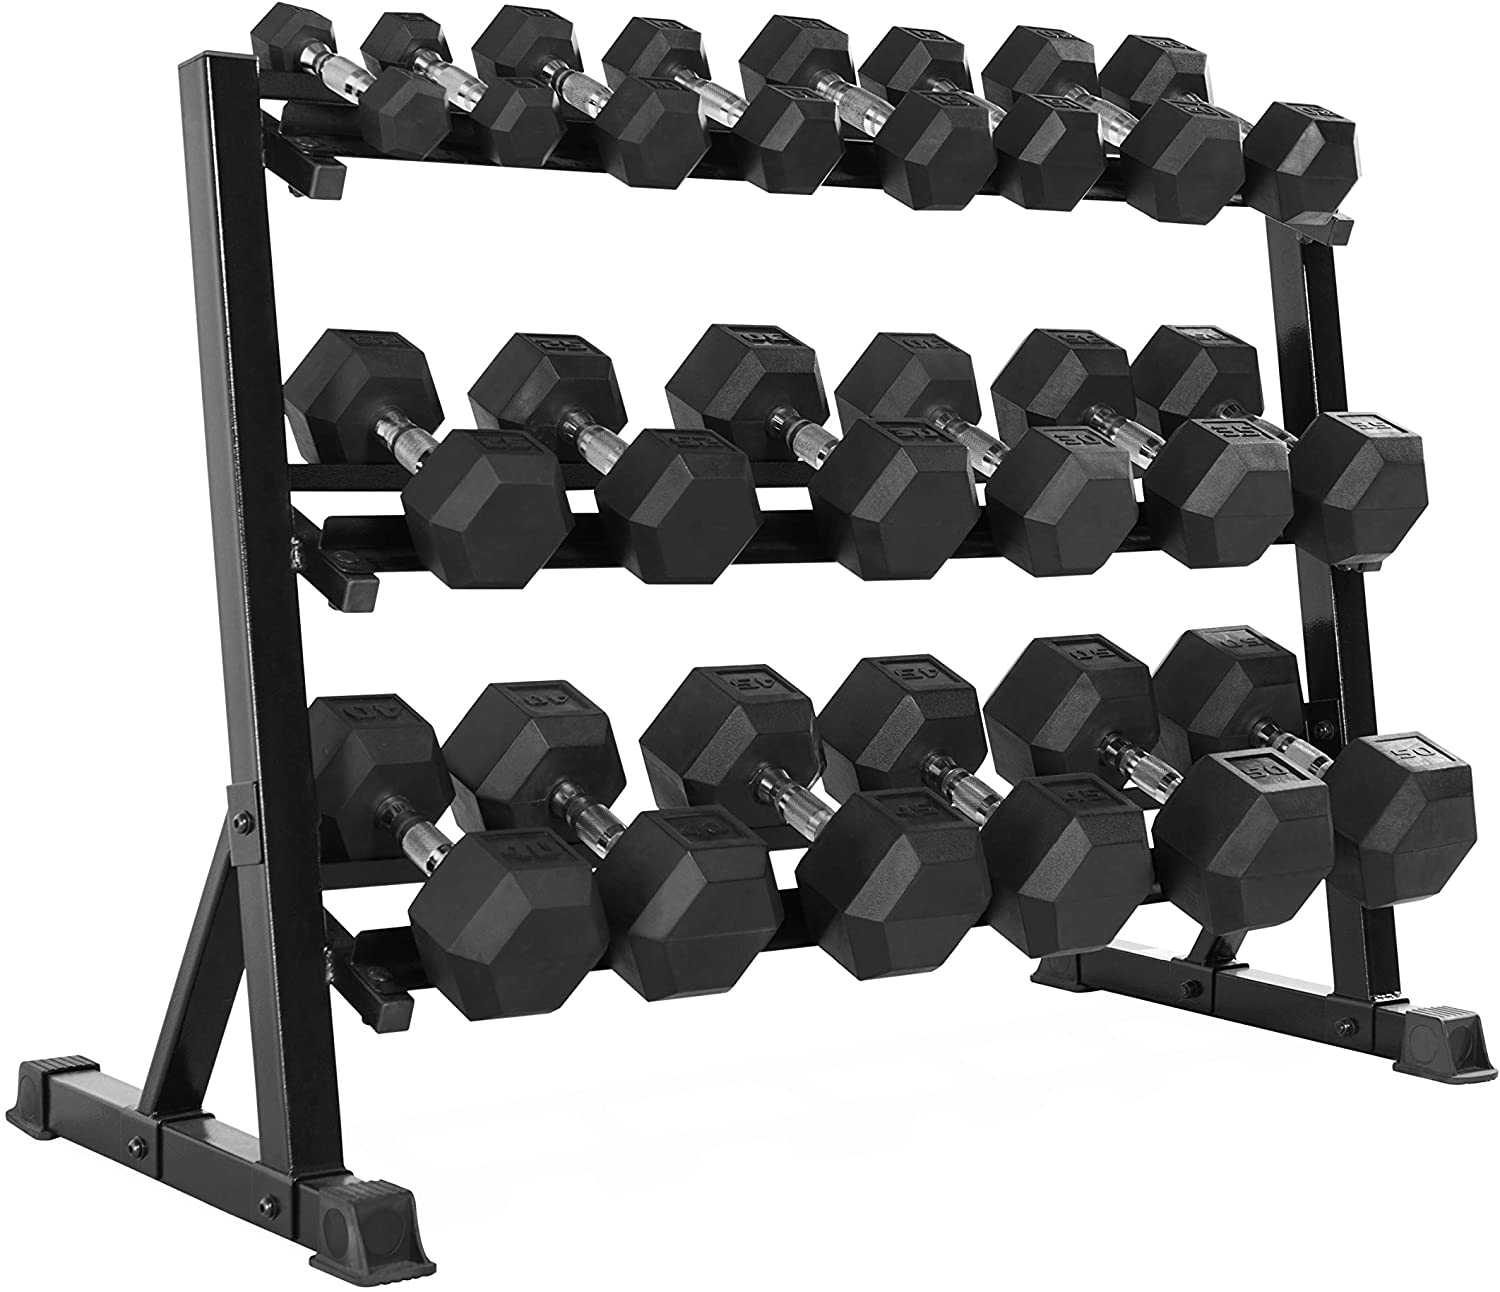 Fitness and Exercise Equipment